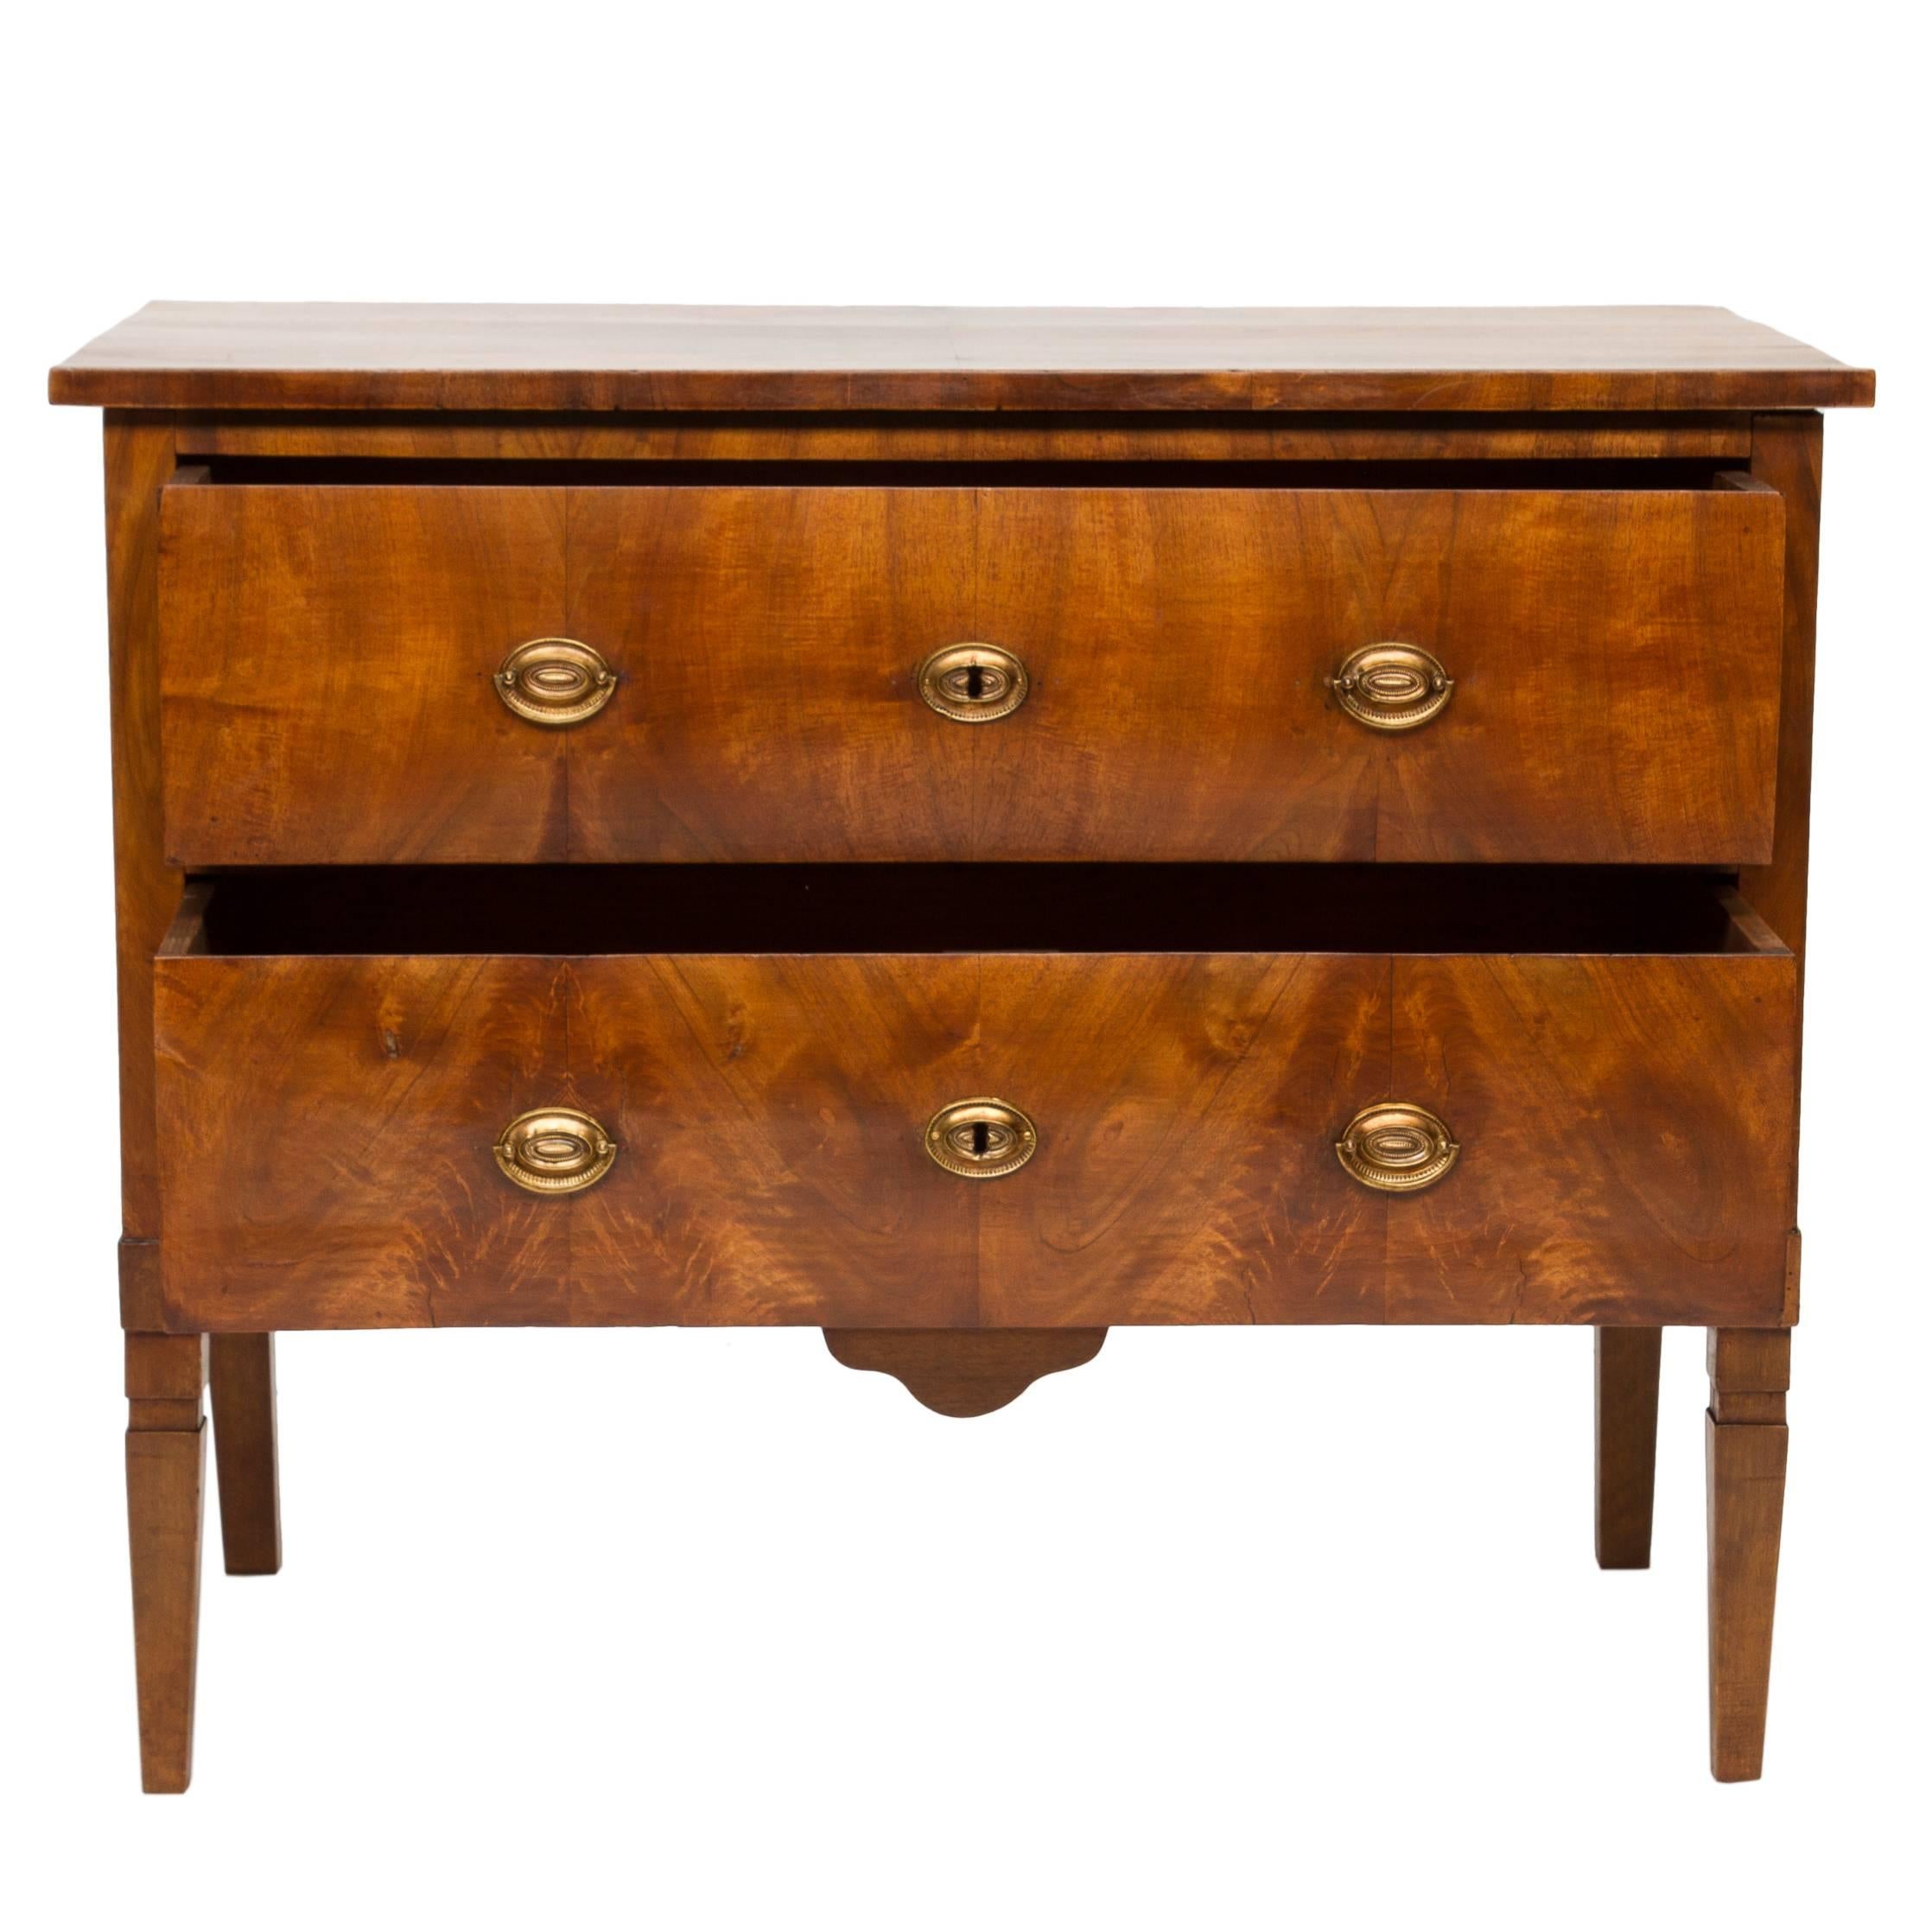 19th century Swedish walnut chest of drawers with brass oval pulls. This piece has had the legs added in a compatible style and been polished. Case is made of pine that has been veneered with thick cuts of walnut. Very nice chest.